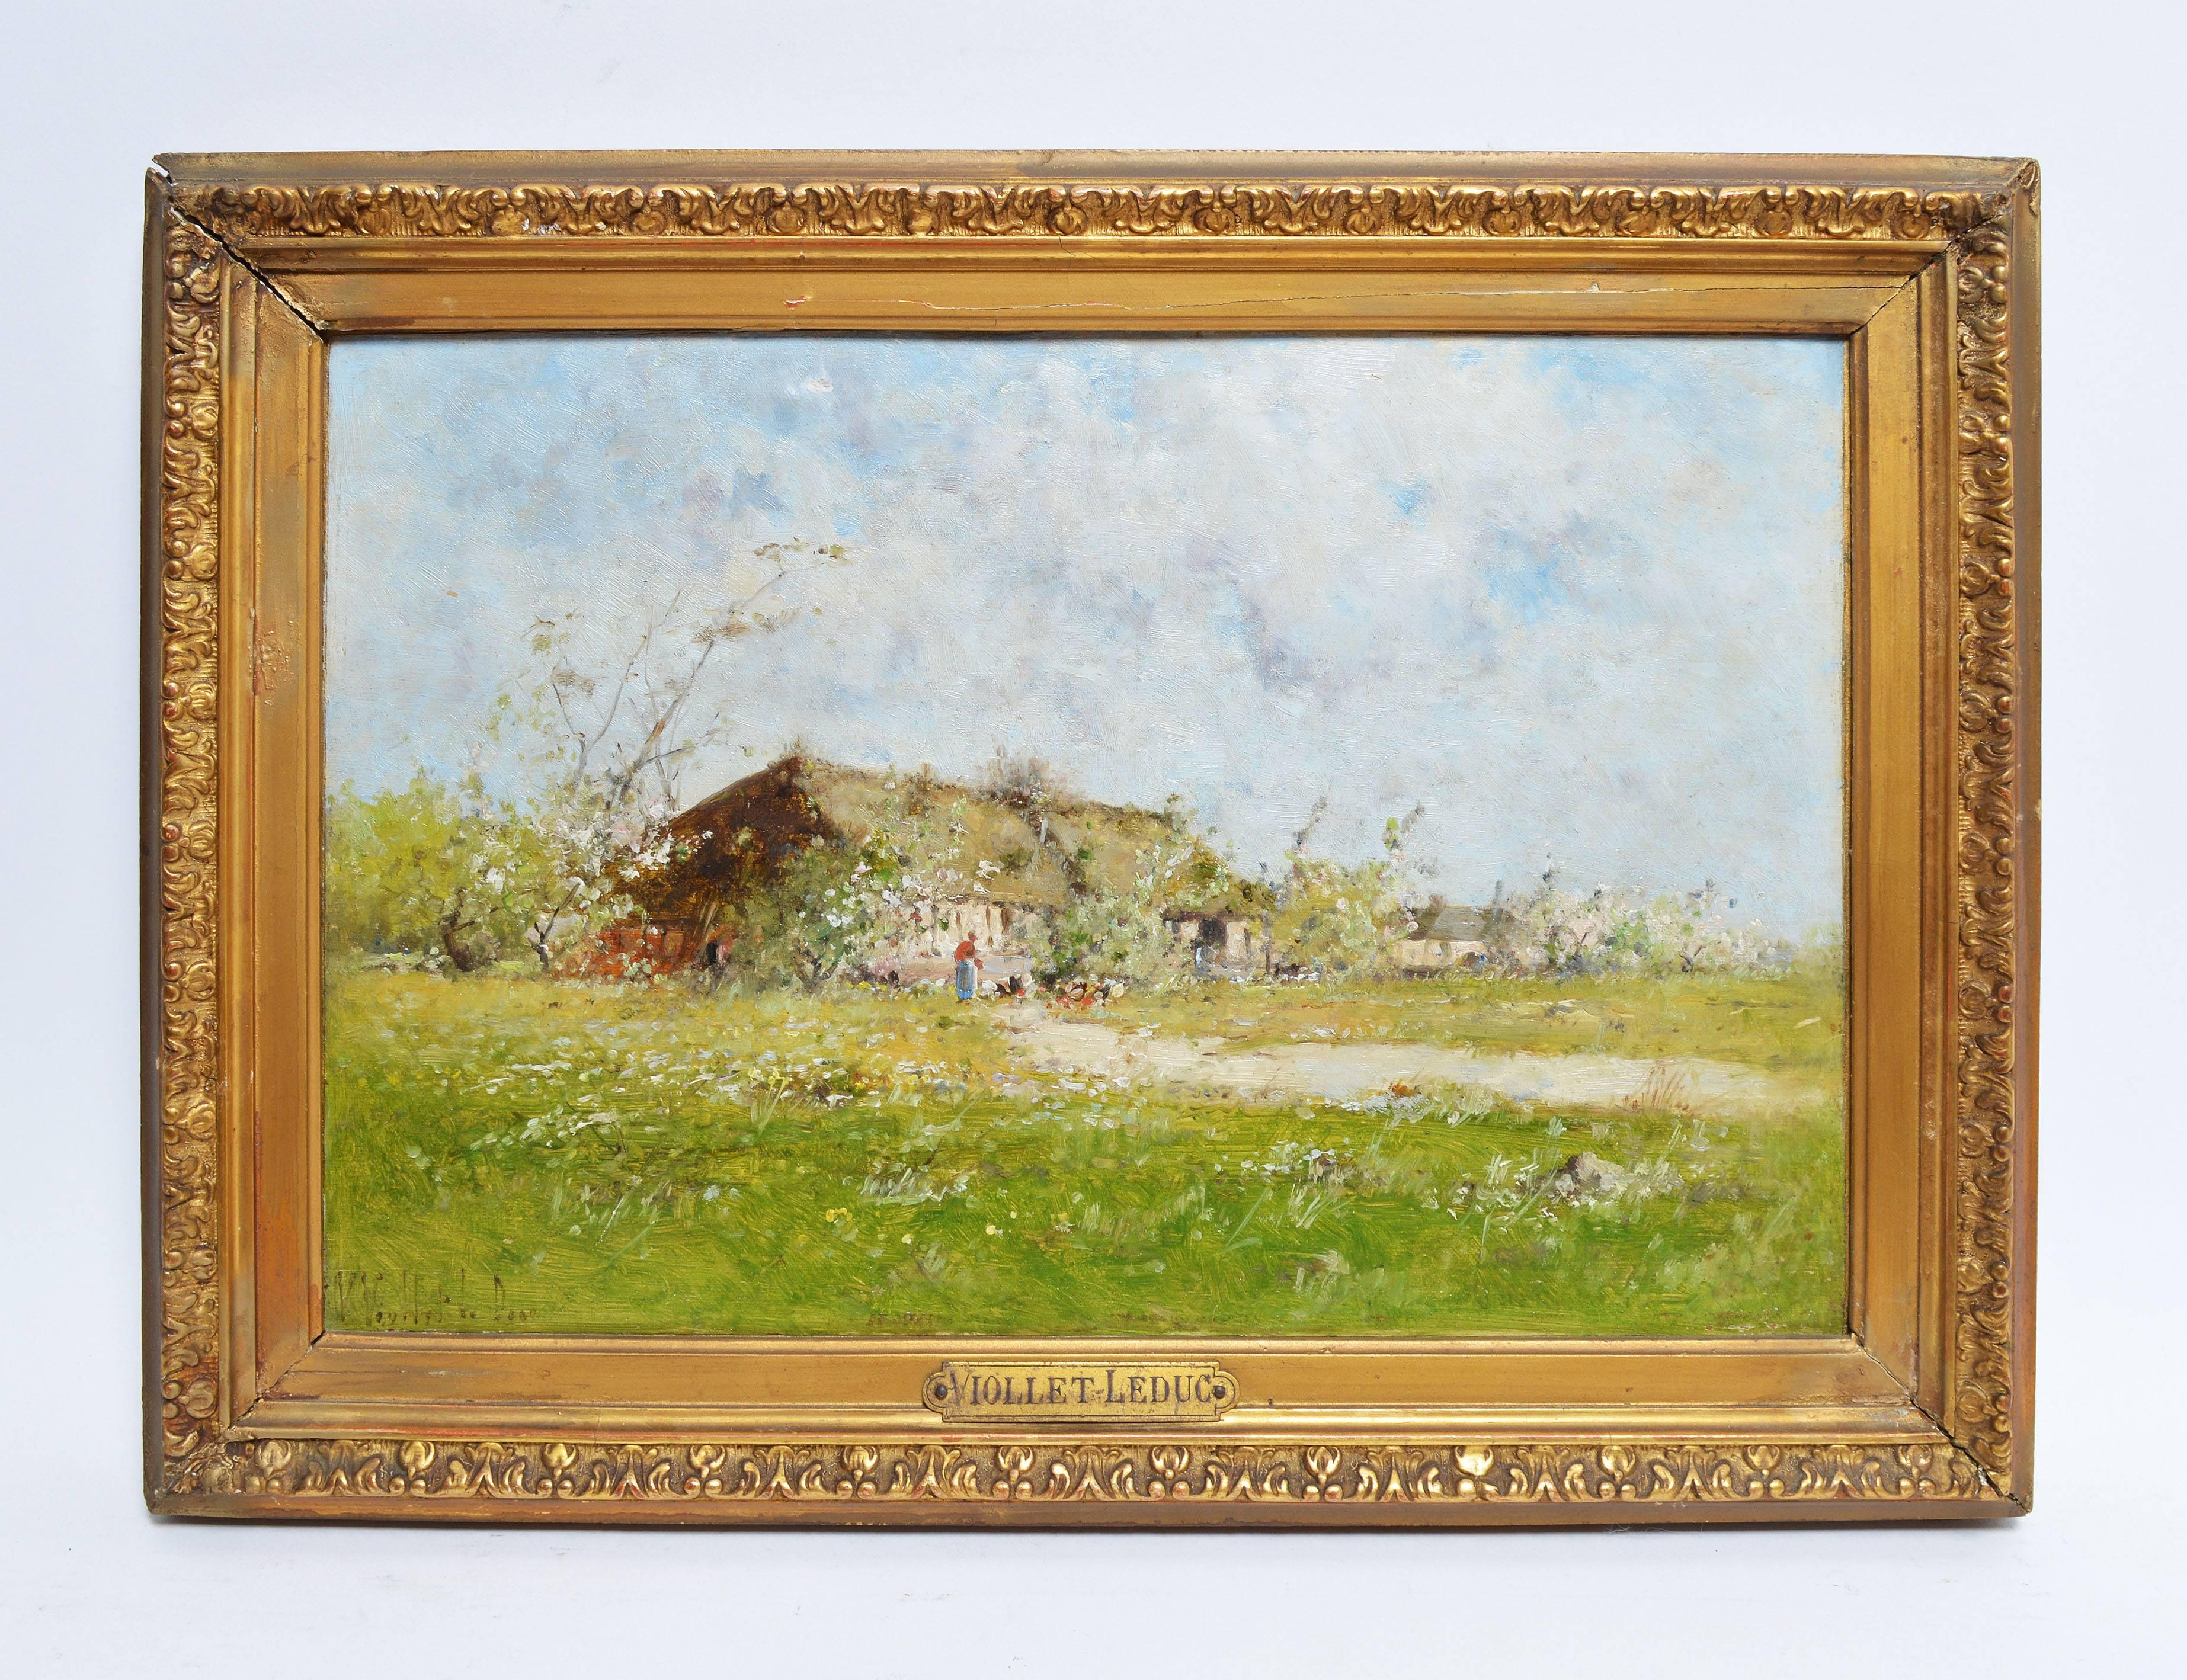 Antique Barbizon school landscape with a farm by Victor Viollet-le-Duc (1848-1901). Oil on board, circa 1875. Signed lower left, &quot;V. Viollet-le-Duc&quot;. Displayed in a period giltwood frame. Image size, 12.25&quot;L x 8.25&quot;H, overall